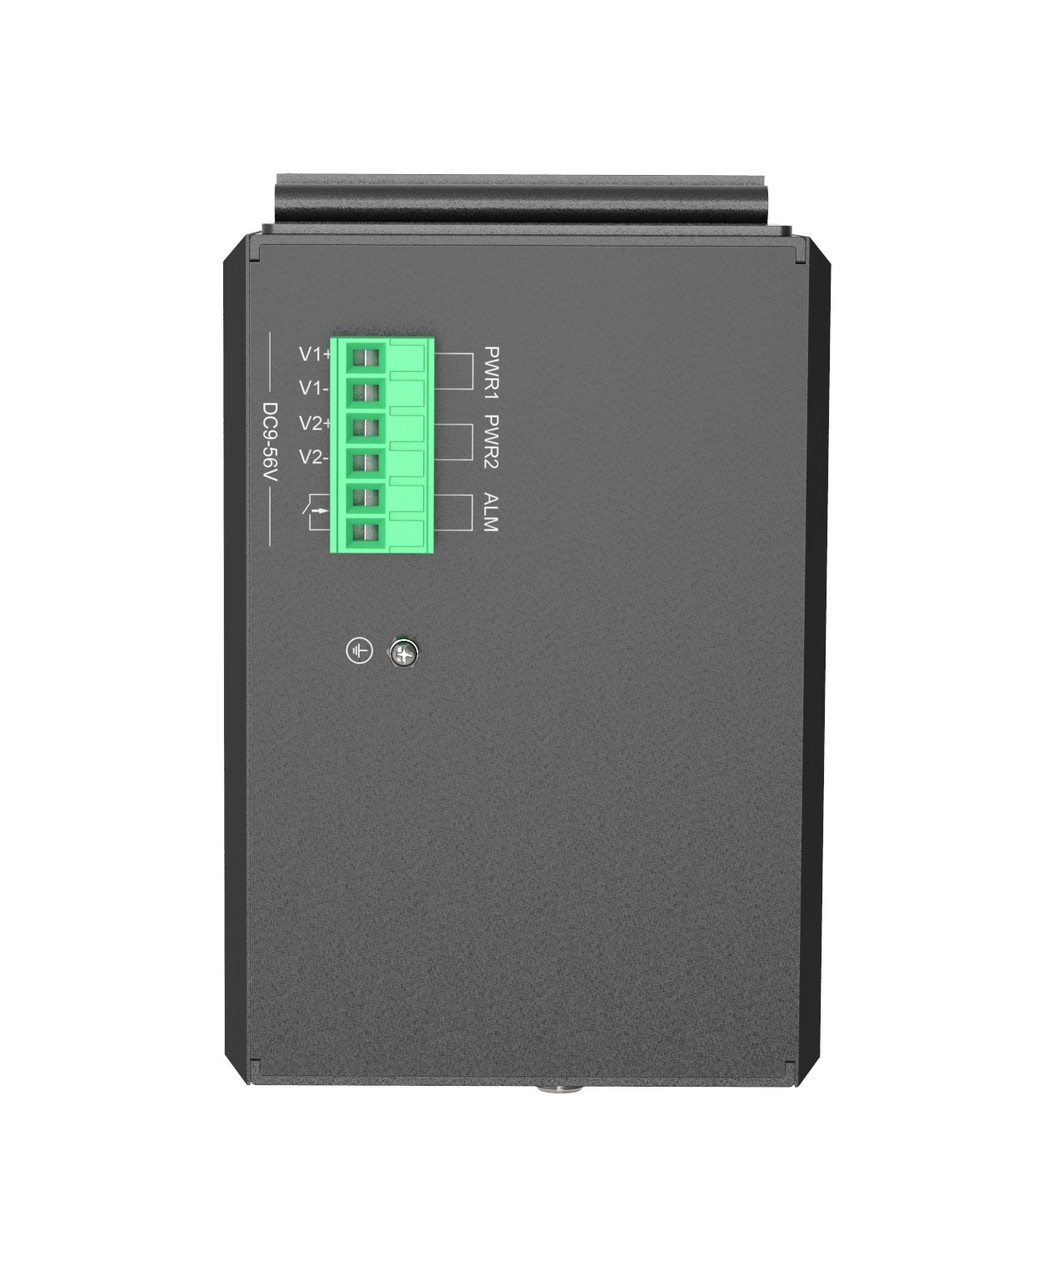 HGW-2404SM-PSE Gigabit Ethernet Managed Industrial PoE switch top view with power inputs and grounding